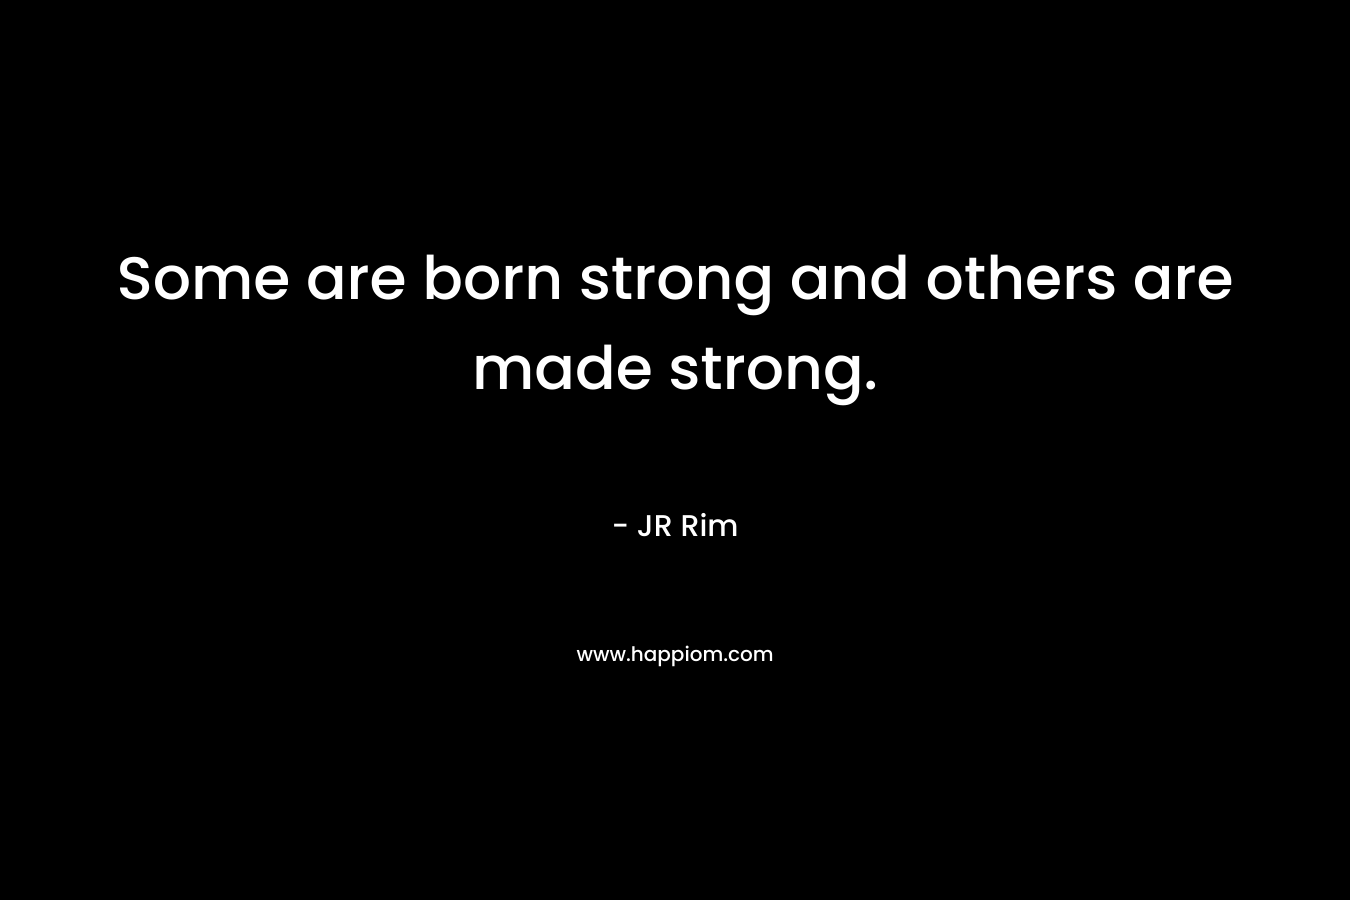 Some are born strong and others are made strong.